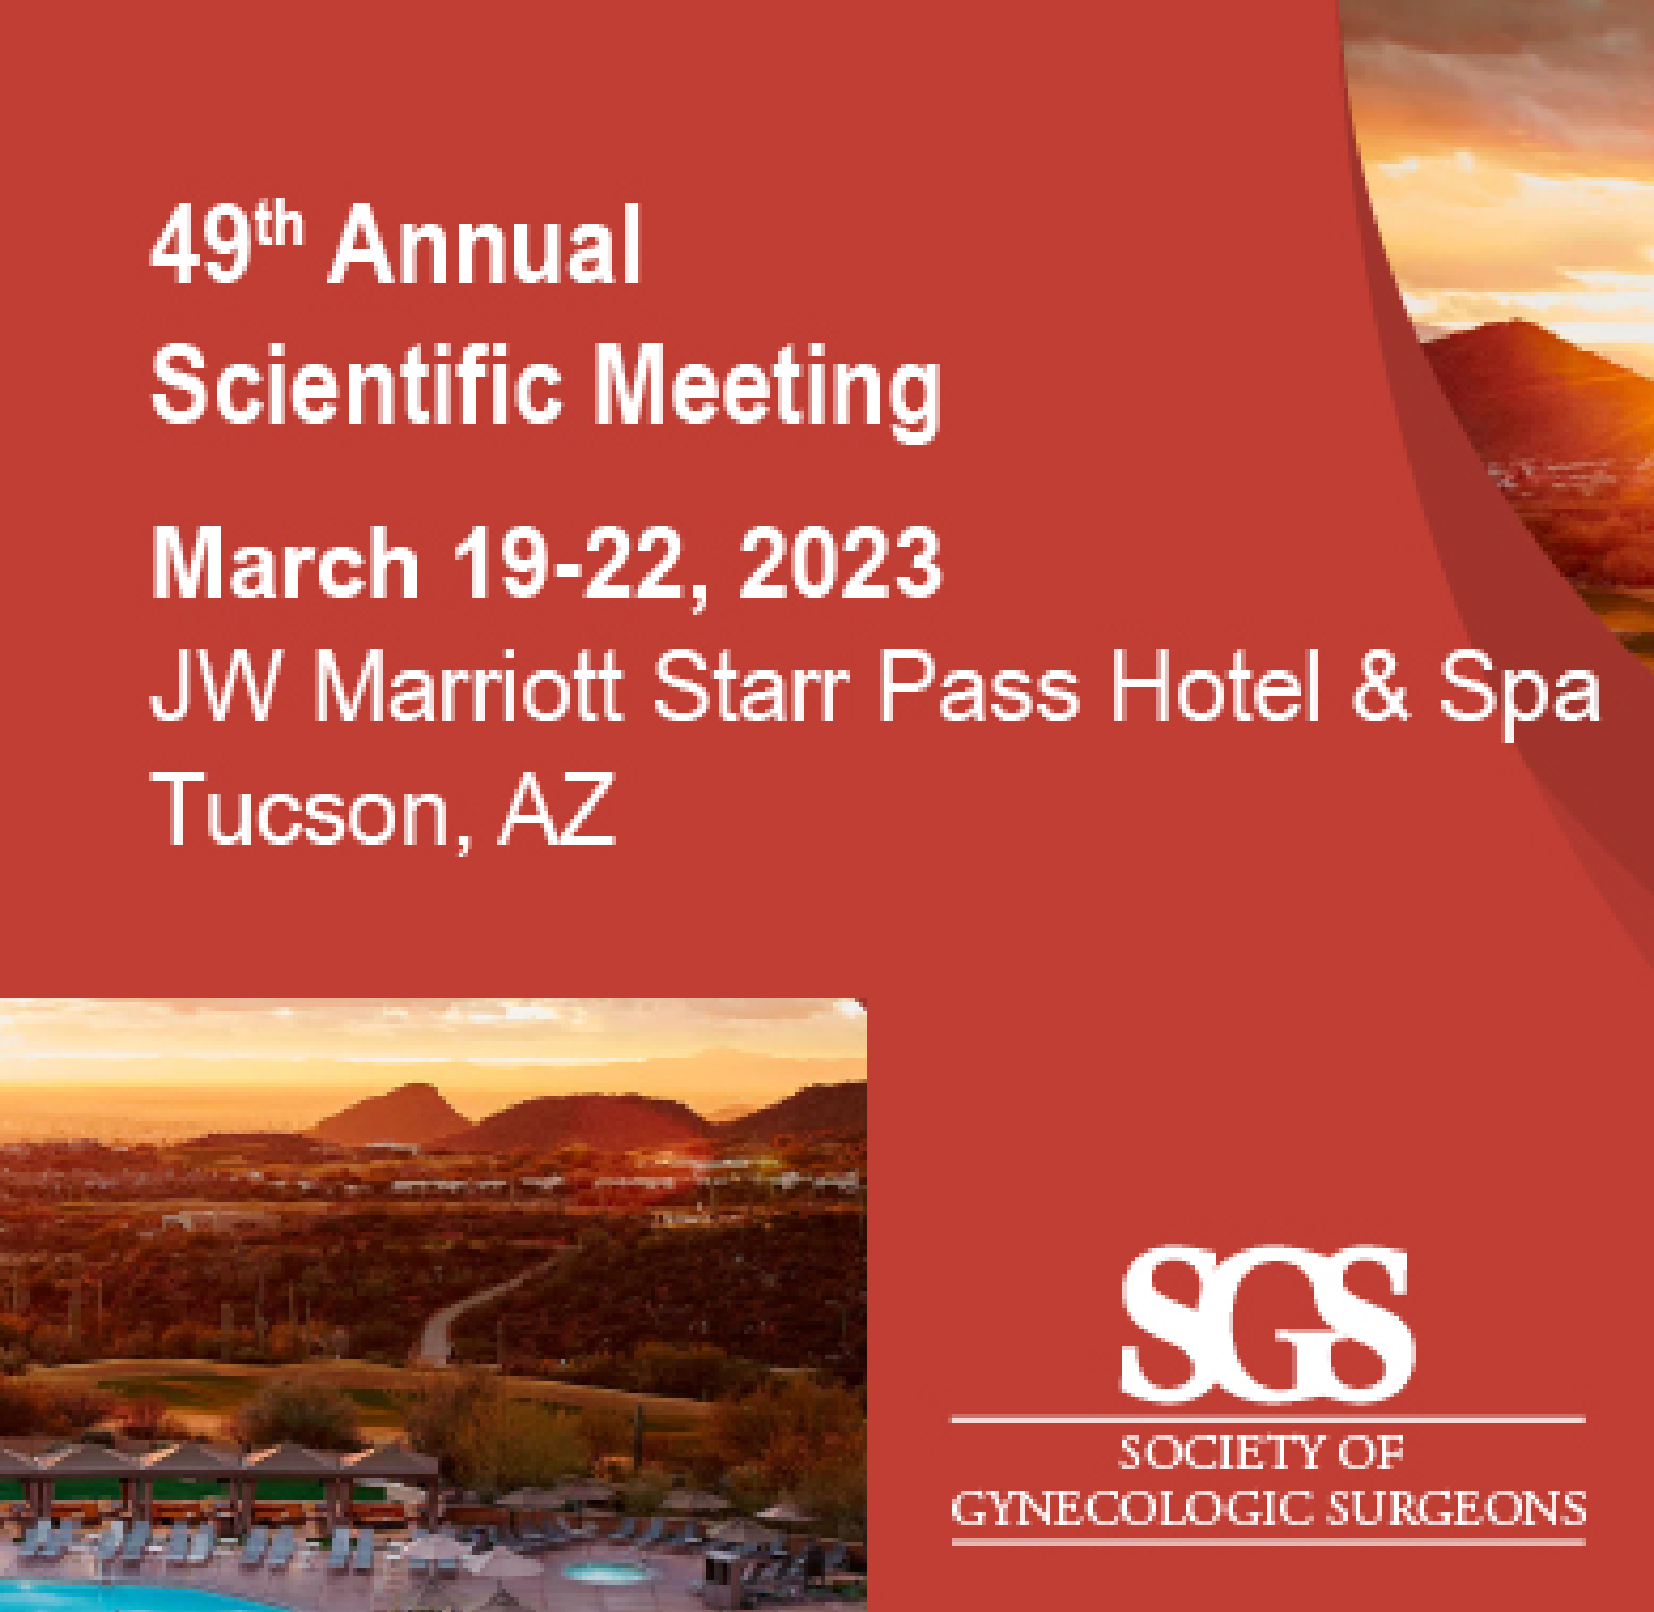 Society of Gynecologic Surgeons 49th Annual Scientific Meeting - SGS 2023